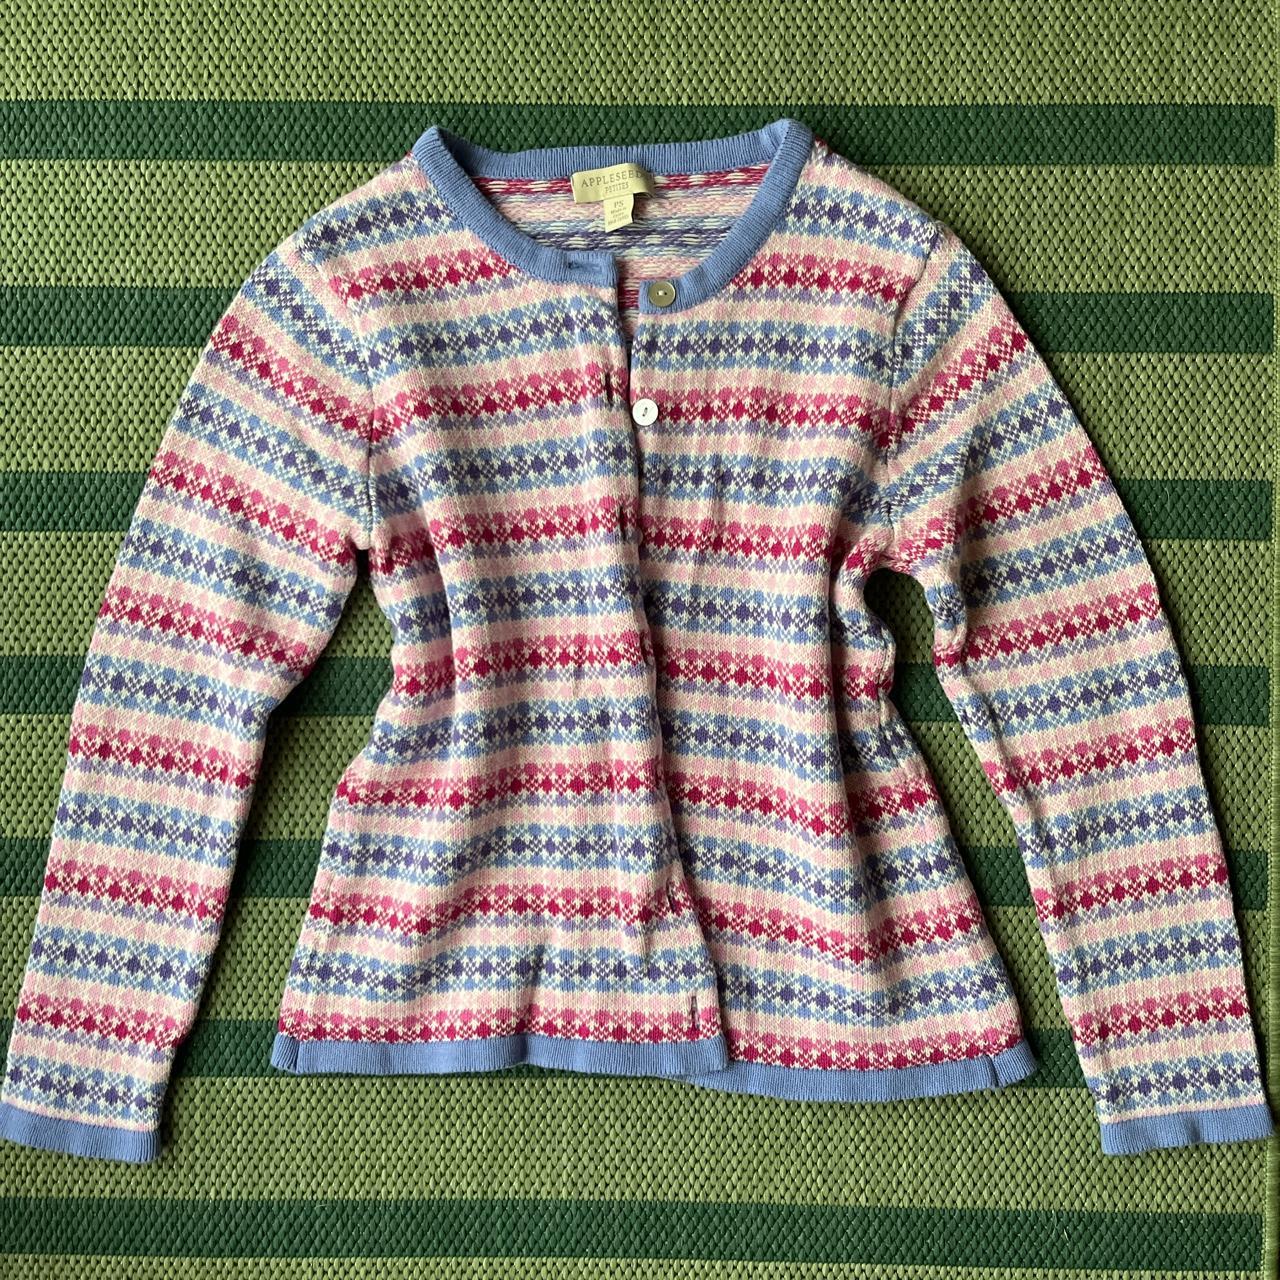 Cute coquette cardigan sweater Size ps fits like a... - Depop